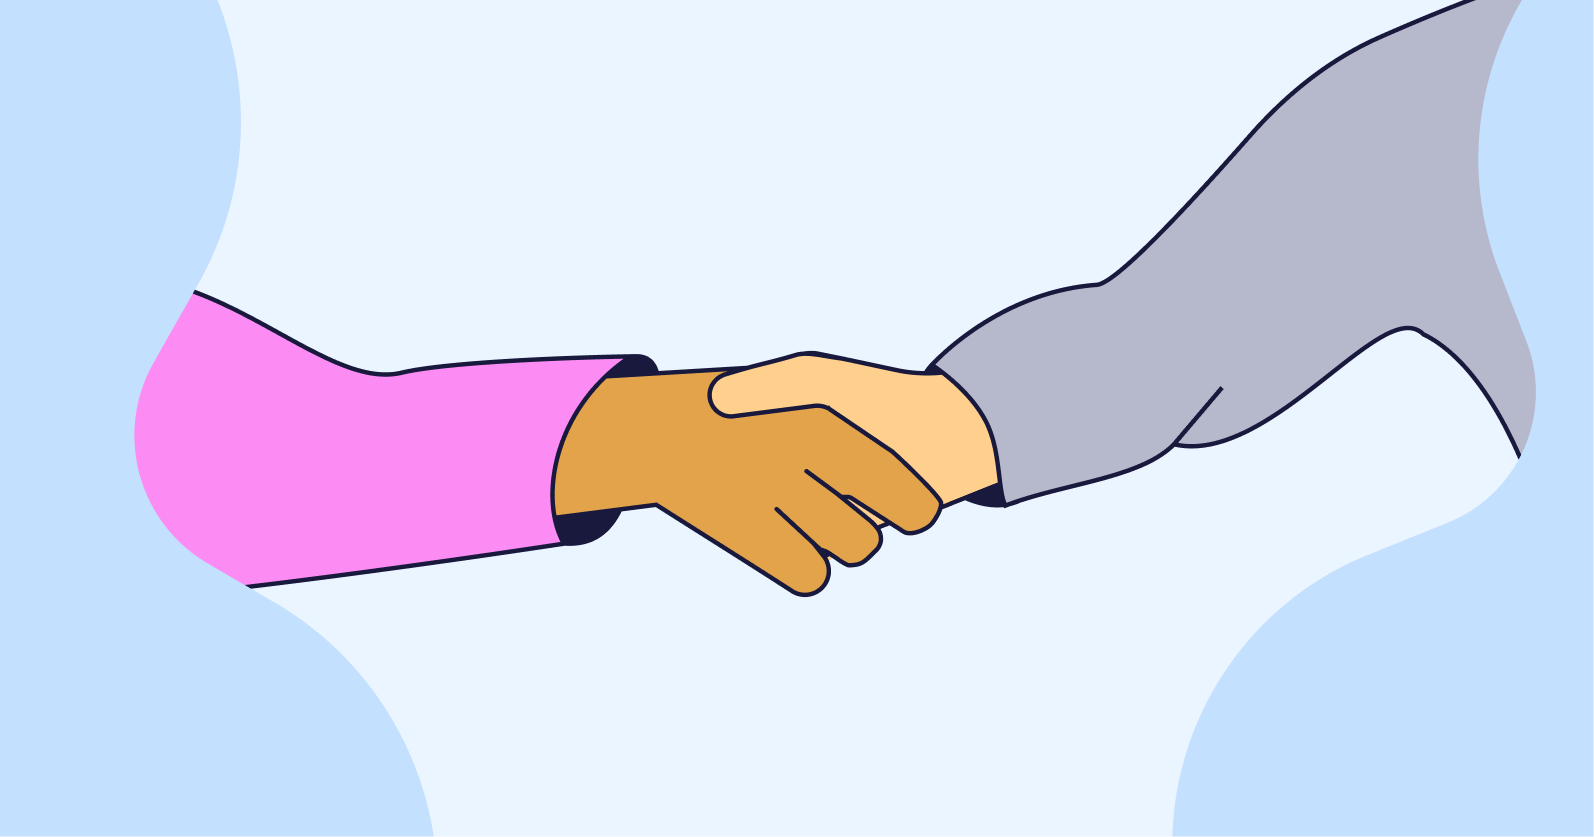 Illustration of two hands meeting to touch.